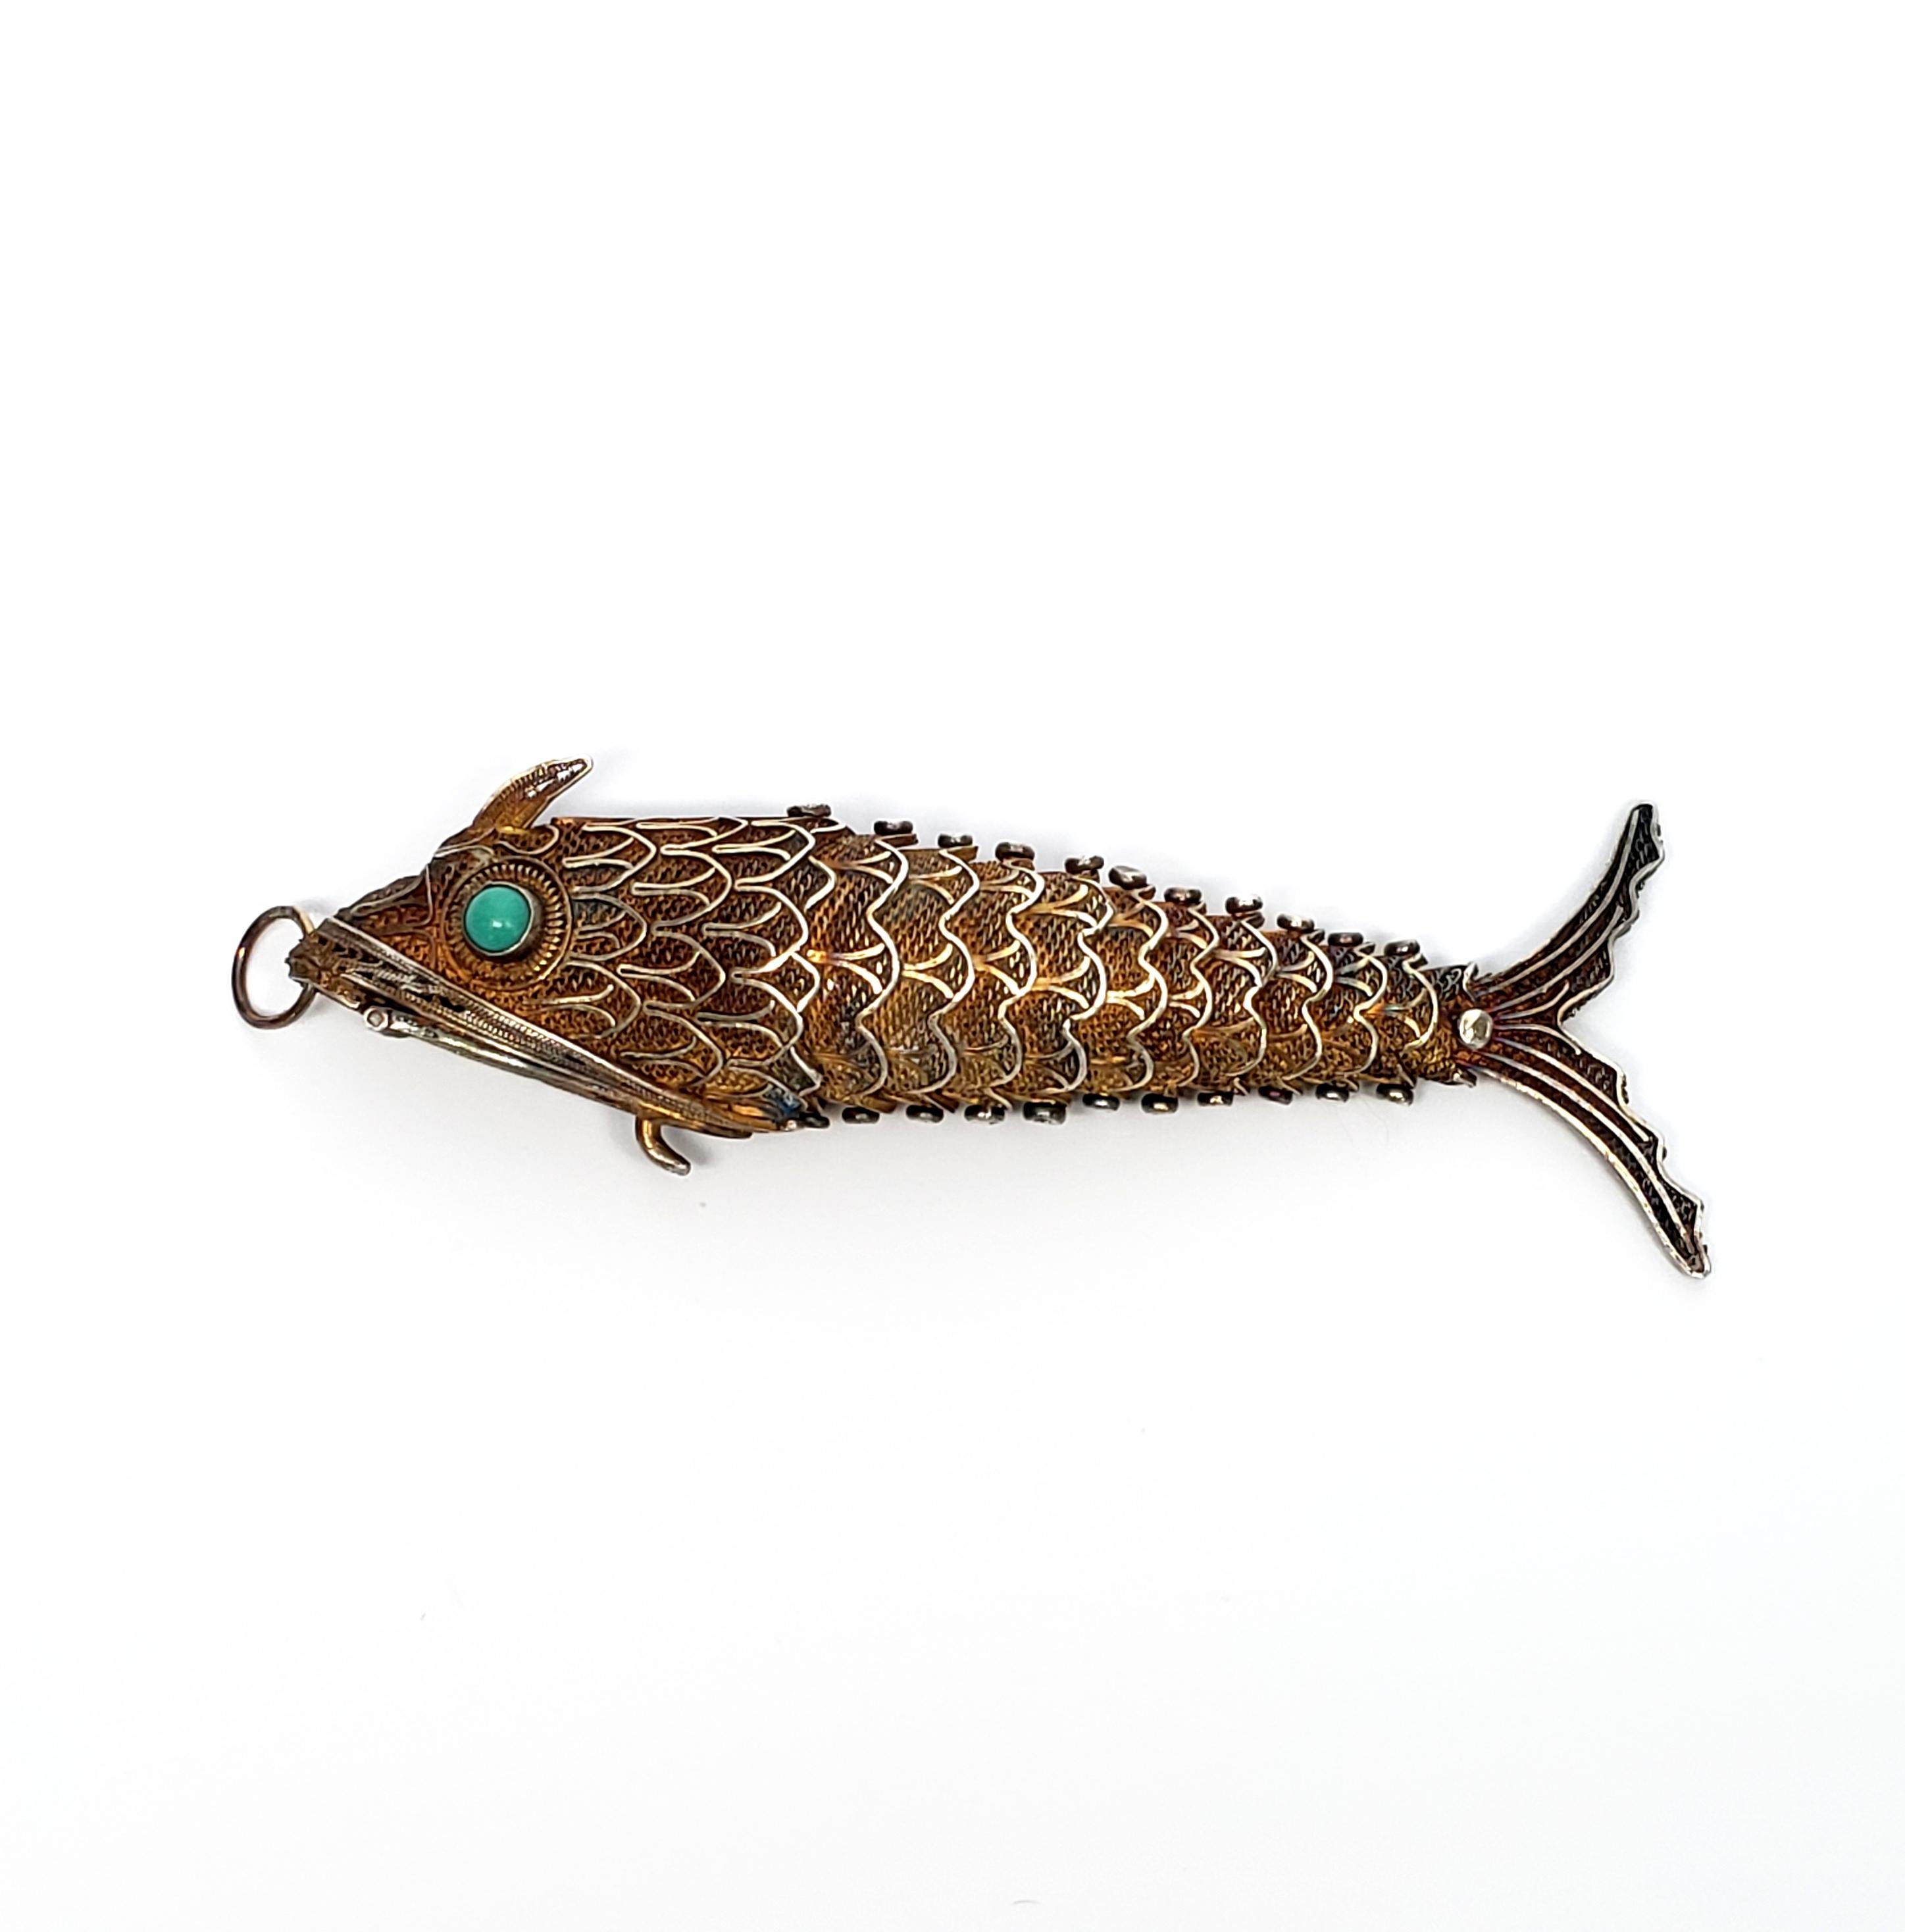 Antique gold vermeil over silver articulating fish pendant with turquoise eyes.

Large fish pendant, the mouth opens to hold pills or a scent sponge. Bezel set round turquoise bead eyes.

Pendant measures 3 1/2